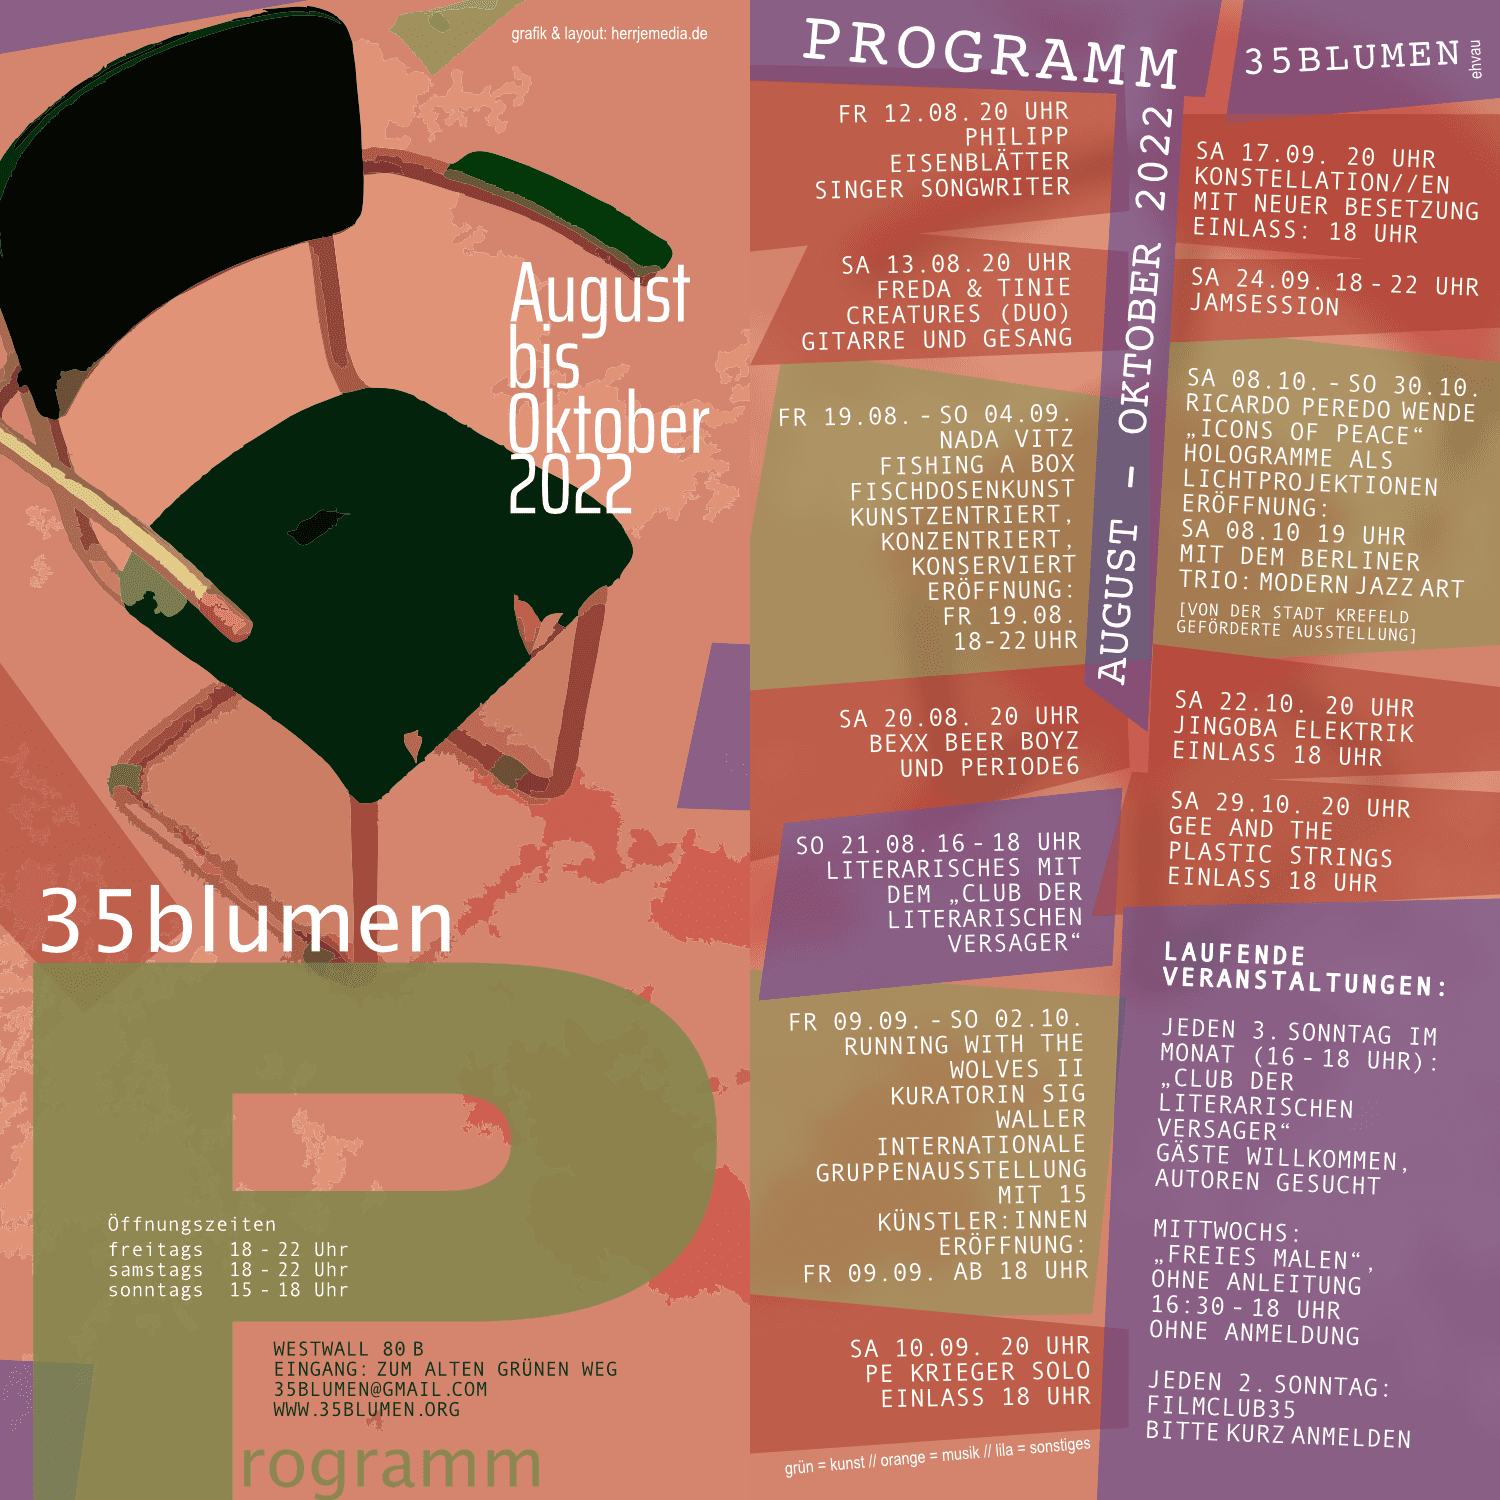 You are currently viewing 35blumen – Programm